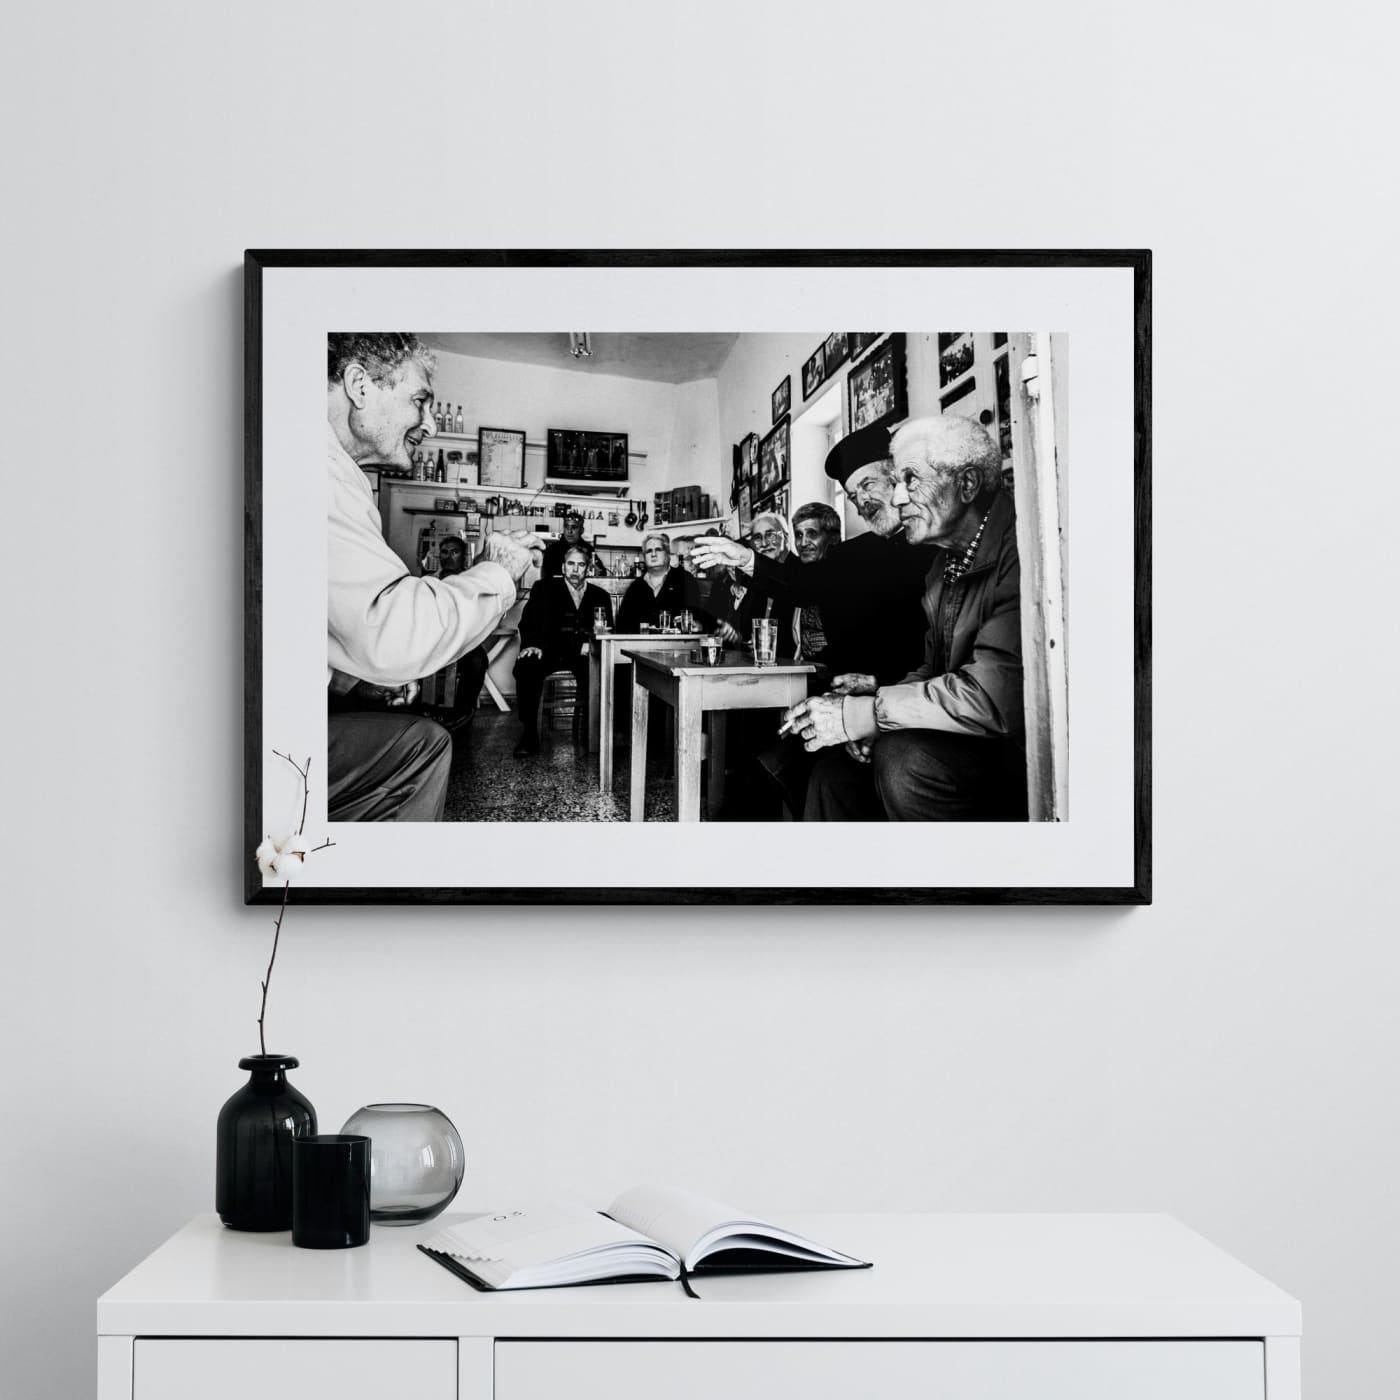 Black and White Photography Wall Art Greece | Cafe in Olympos Karpathos Dodecanese by George Tatakis - single framed photo